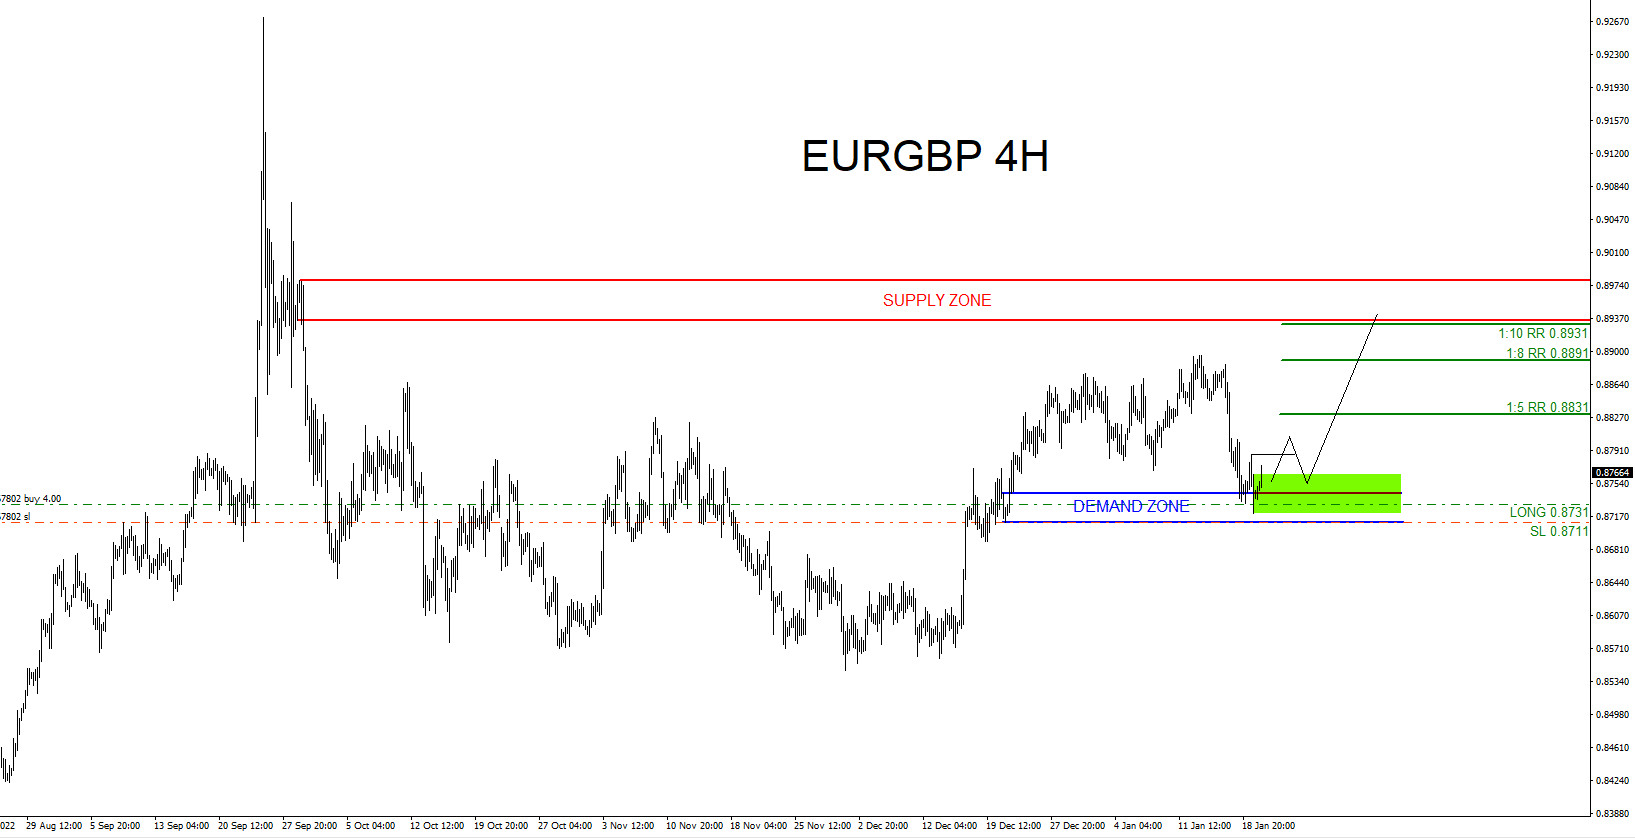 EURGBP : Catching the 200 Pip 1:10 Risk/Reward Move Higher